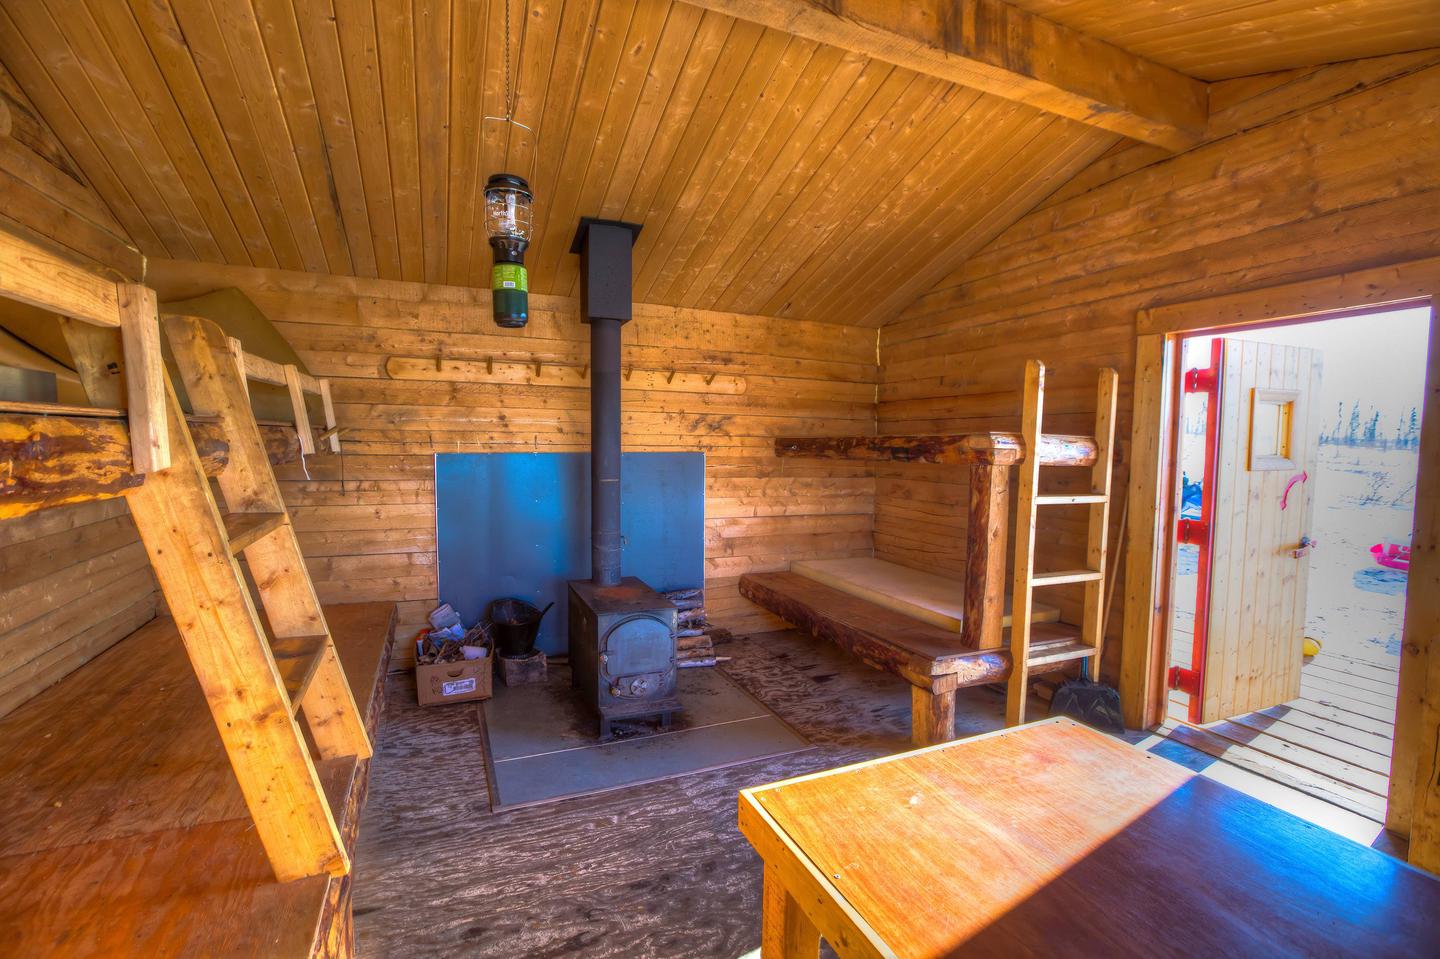 Bunks and woodstove in a log cabinBunks, table, and woodstove in Crowberry Cabin.